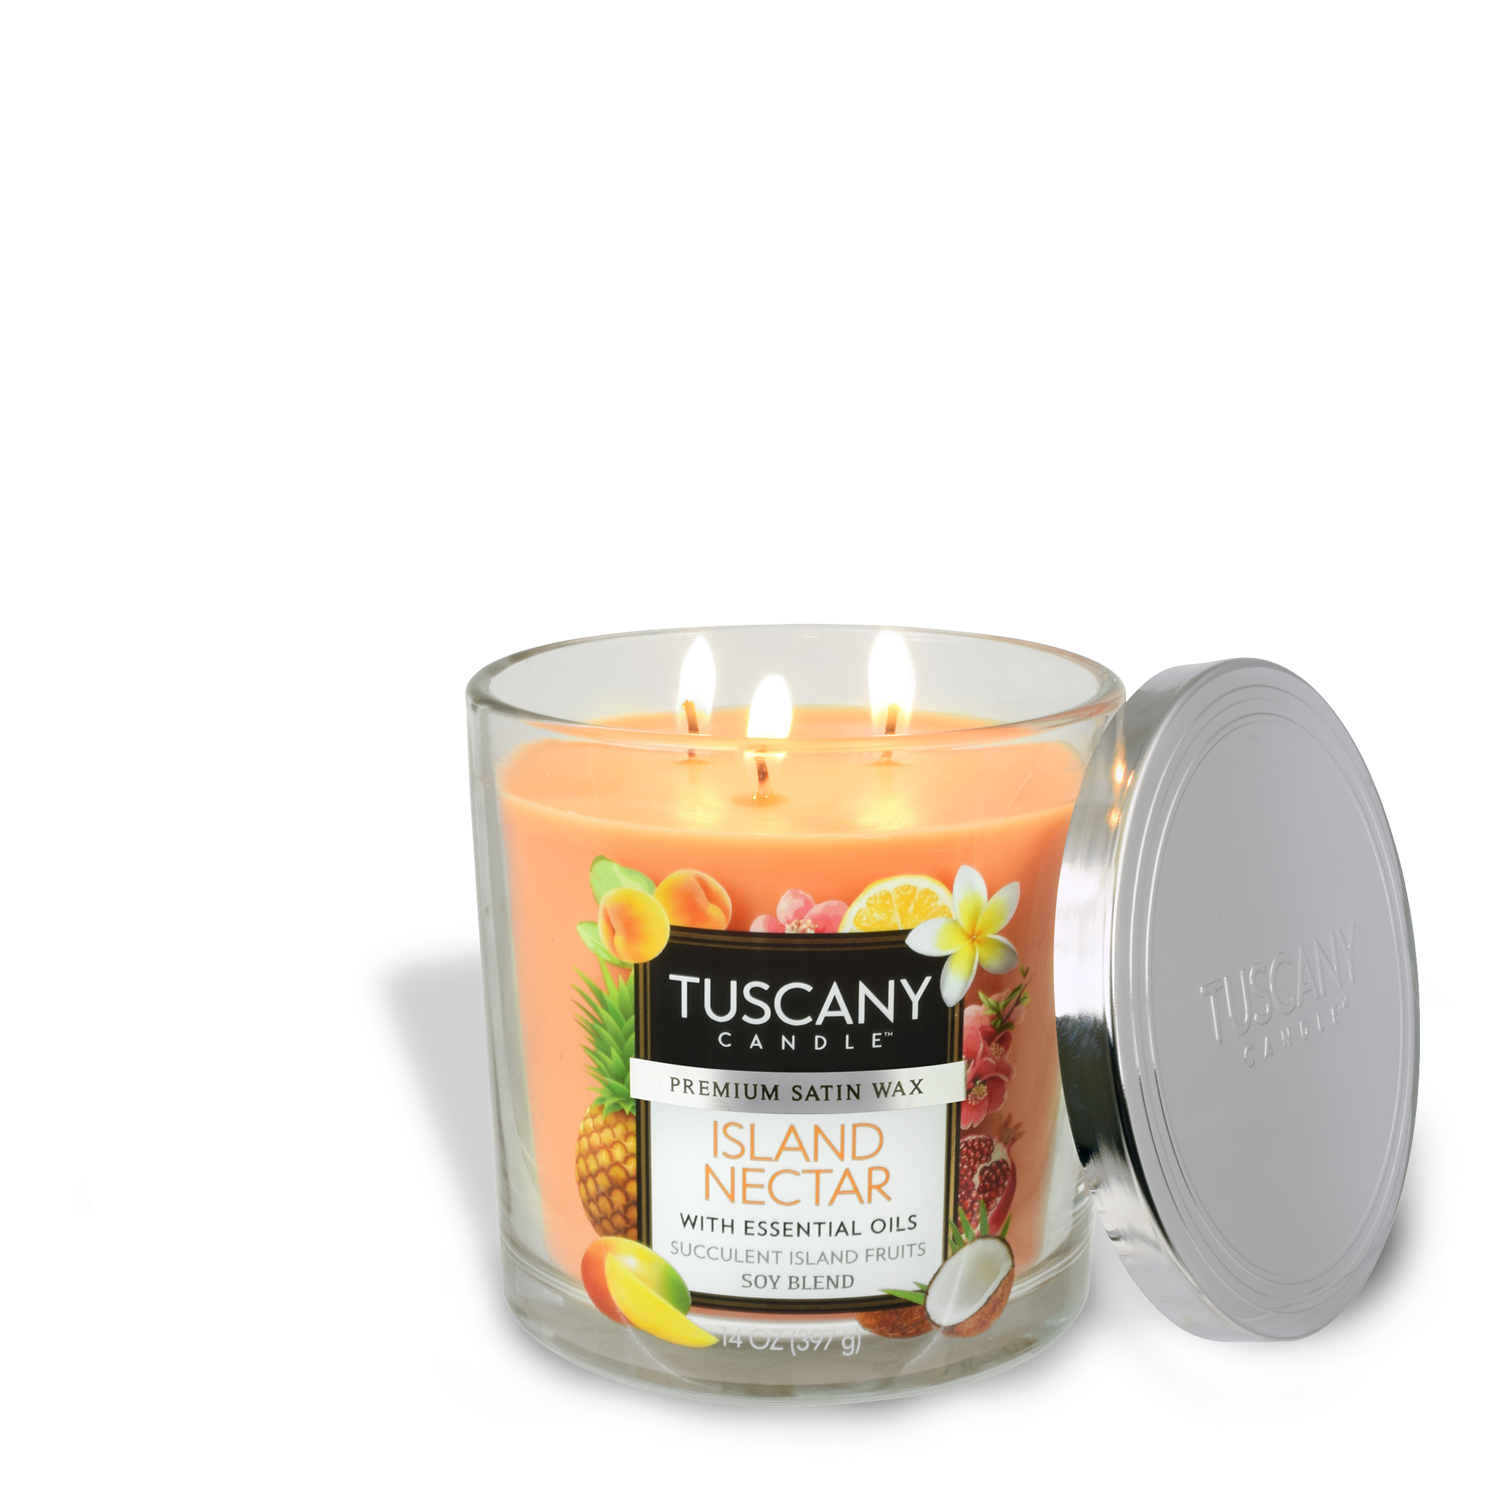 Experience a tropical paradise with our Island Nectar Long-Lasting Scented Jar Candle (14 oz) infused with the invigorating aromas of Tuscany, oranges, and pineapples. Indulge in the refreshing scent of Tuscany Candle.